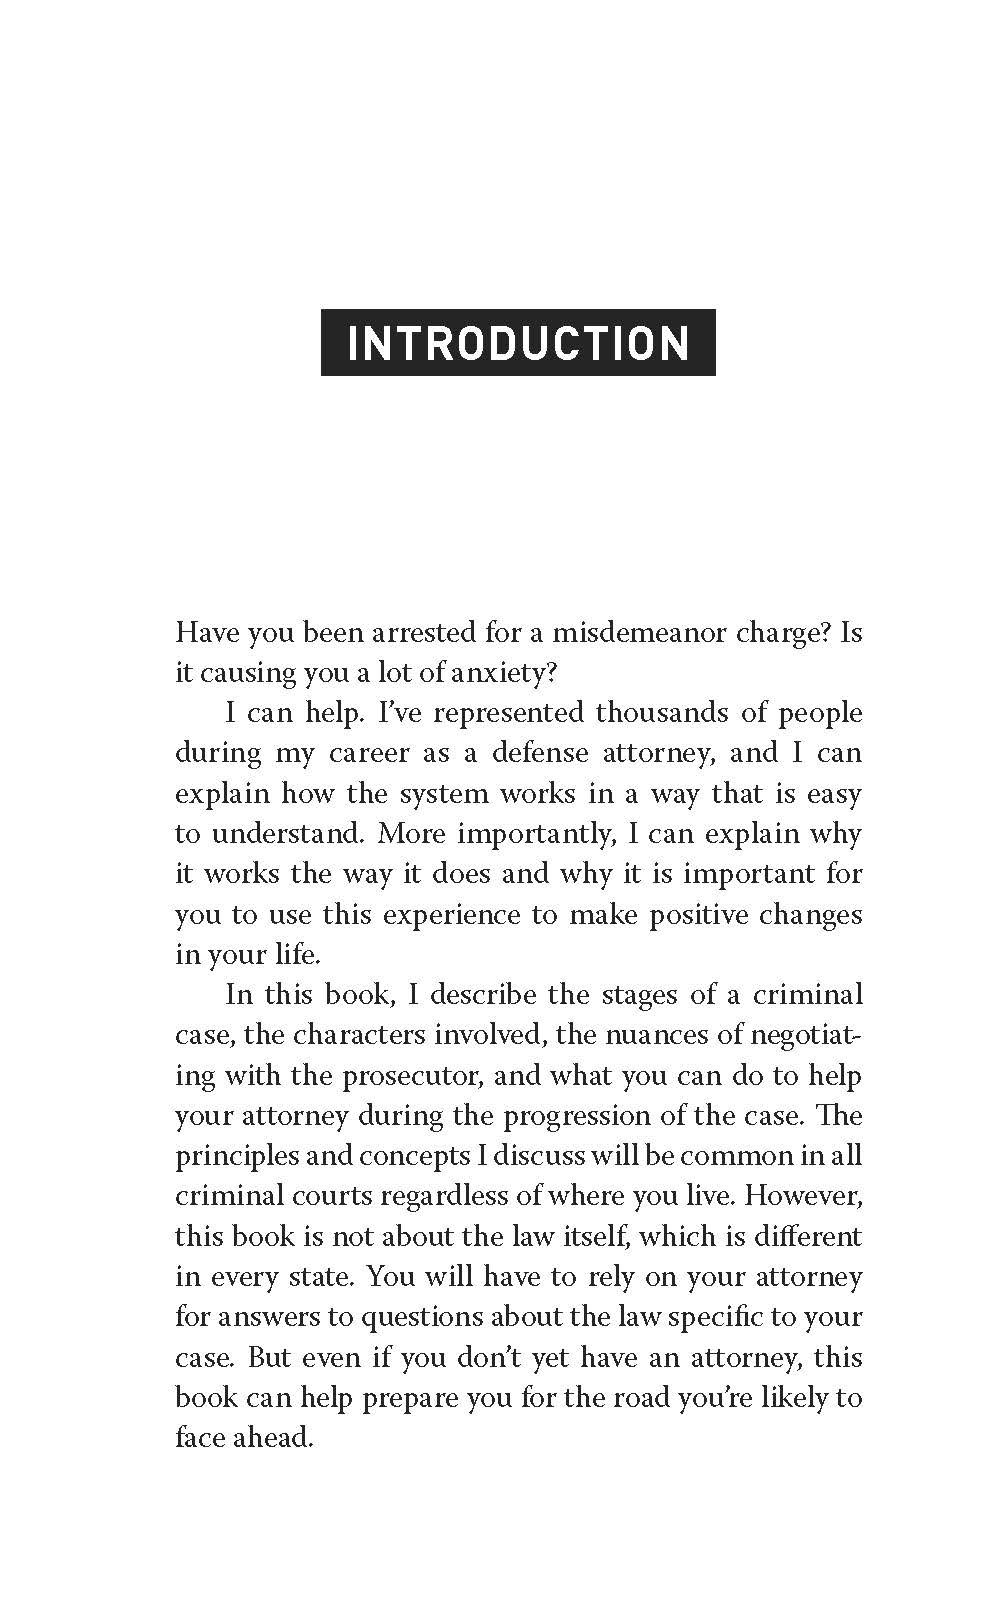 Sample_of_Defendant_s_Guide_to_Defense_Page_04.jpg